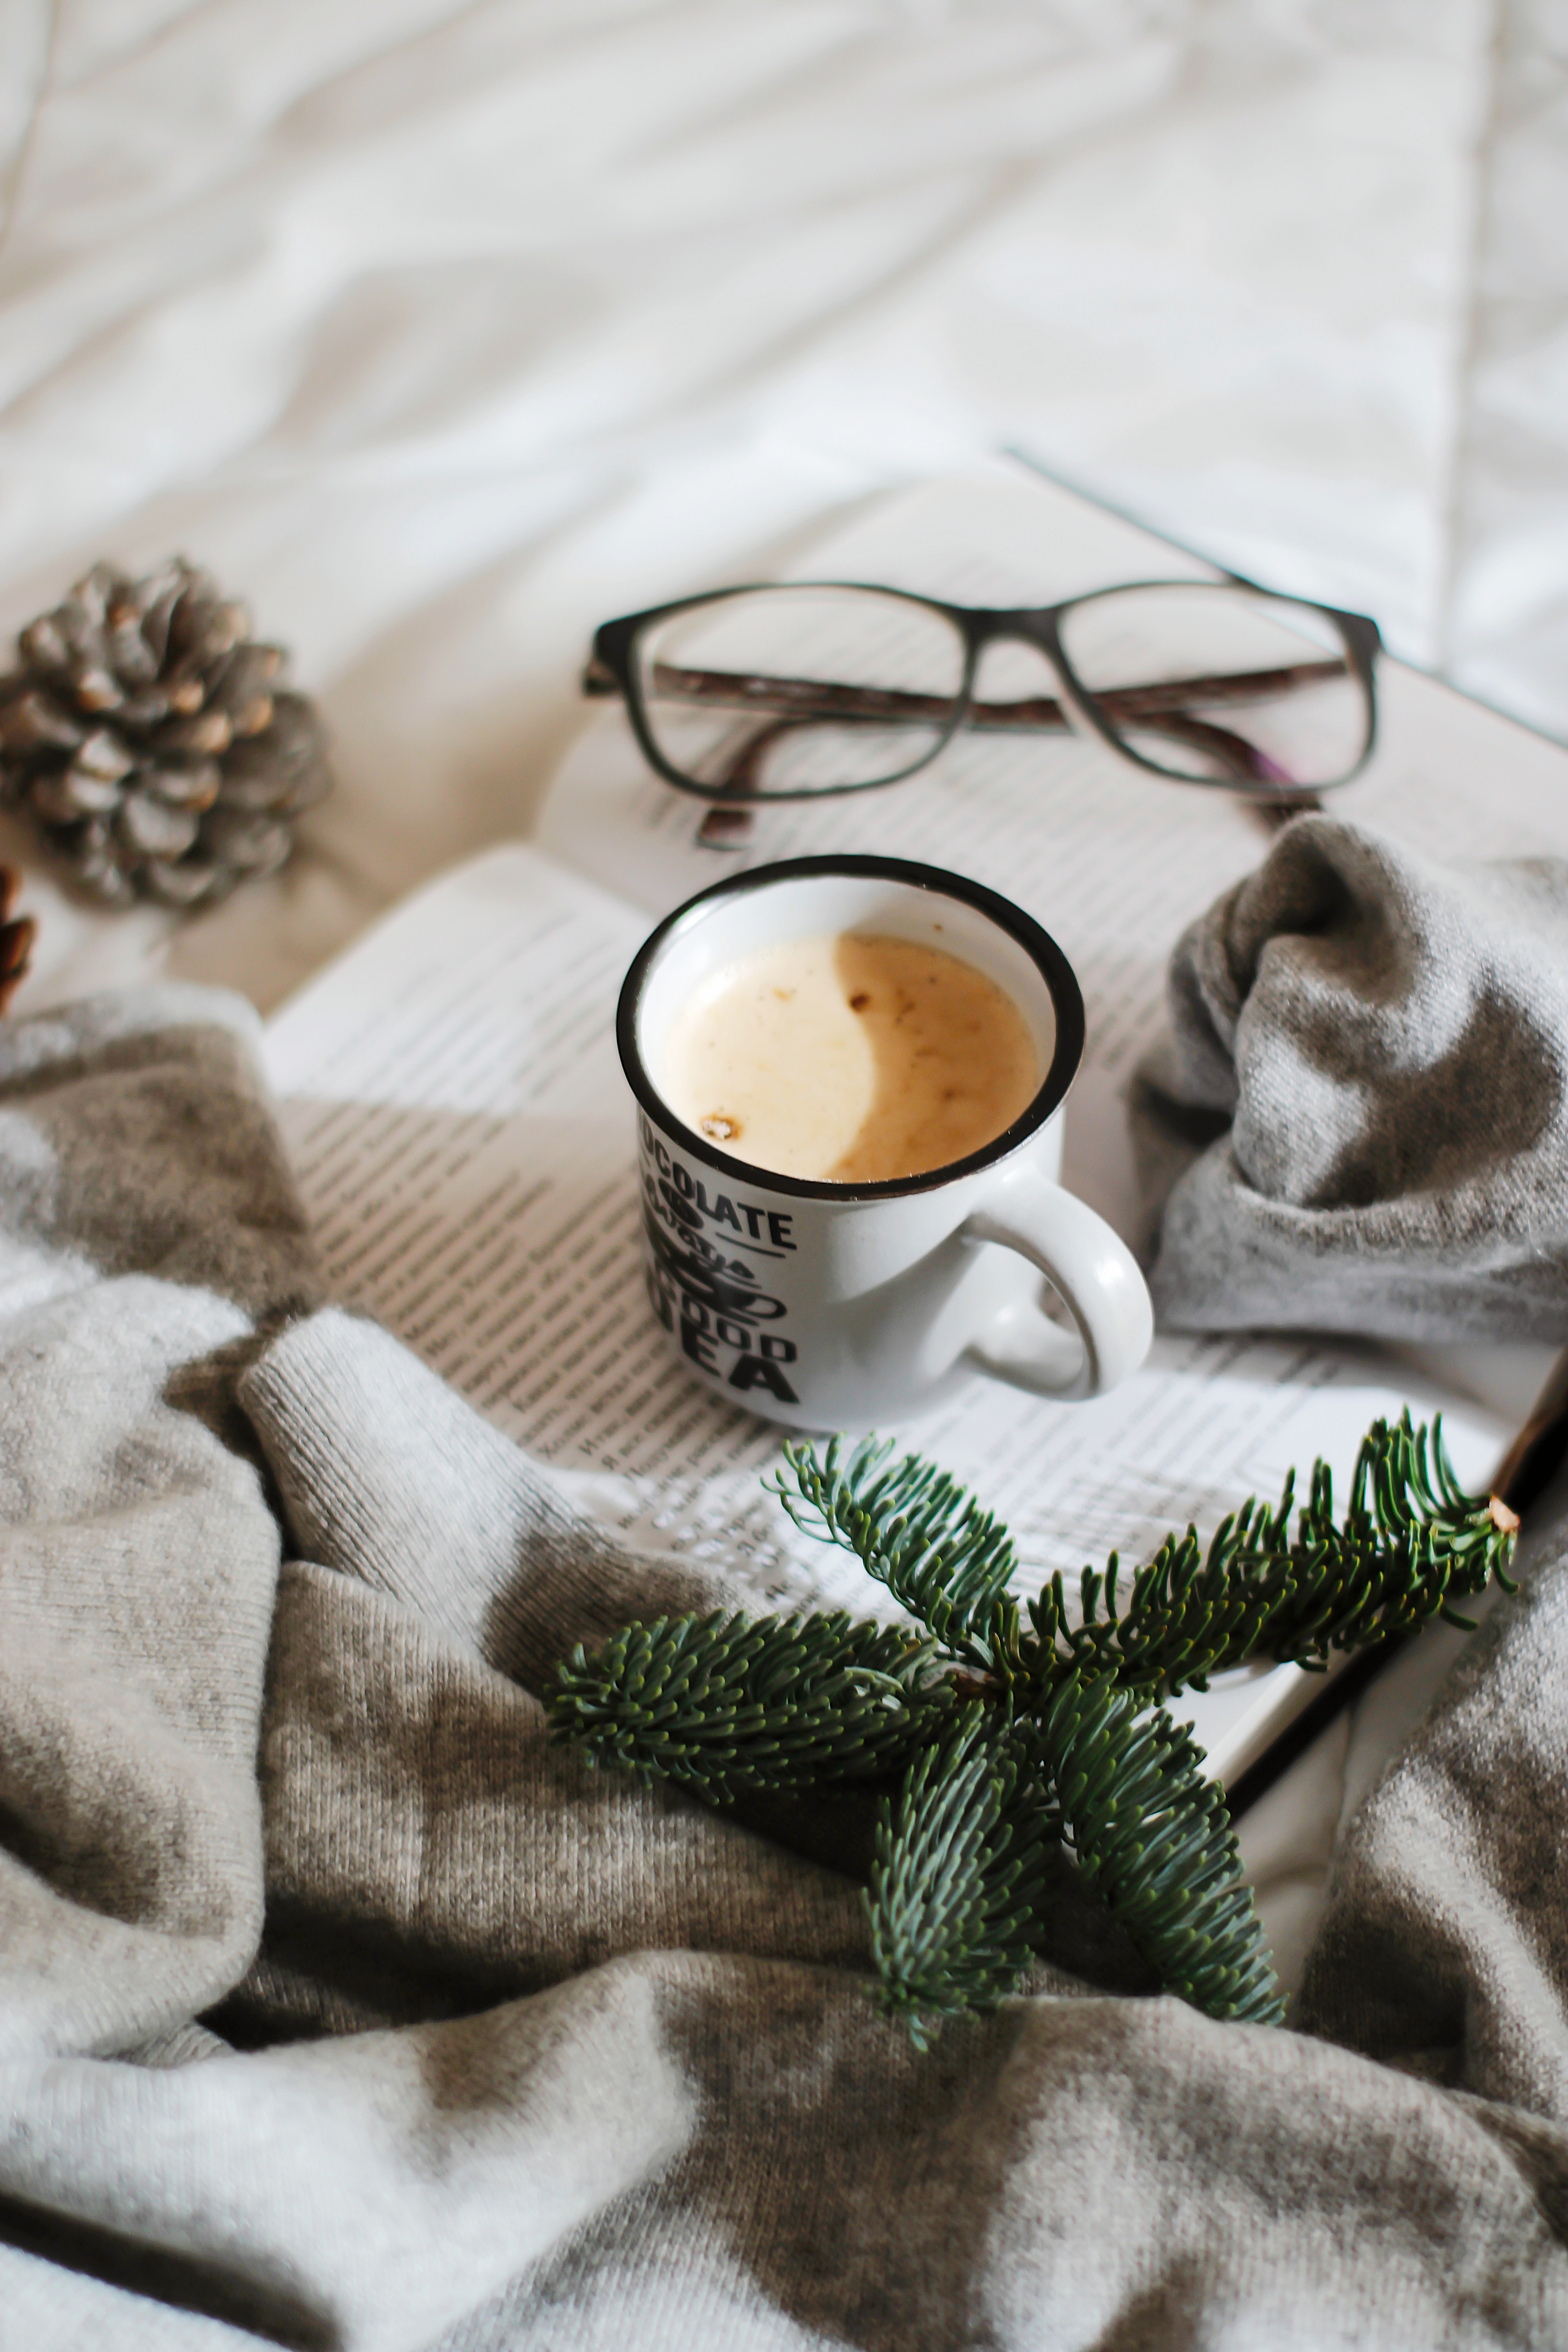 mug, coffee, miscellanea, miscellaneous, cup, branch, book, glasses, spectacles